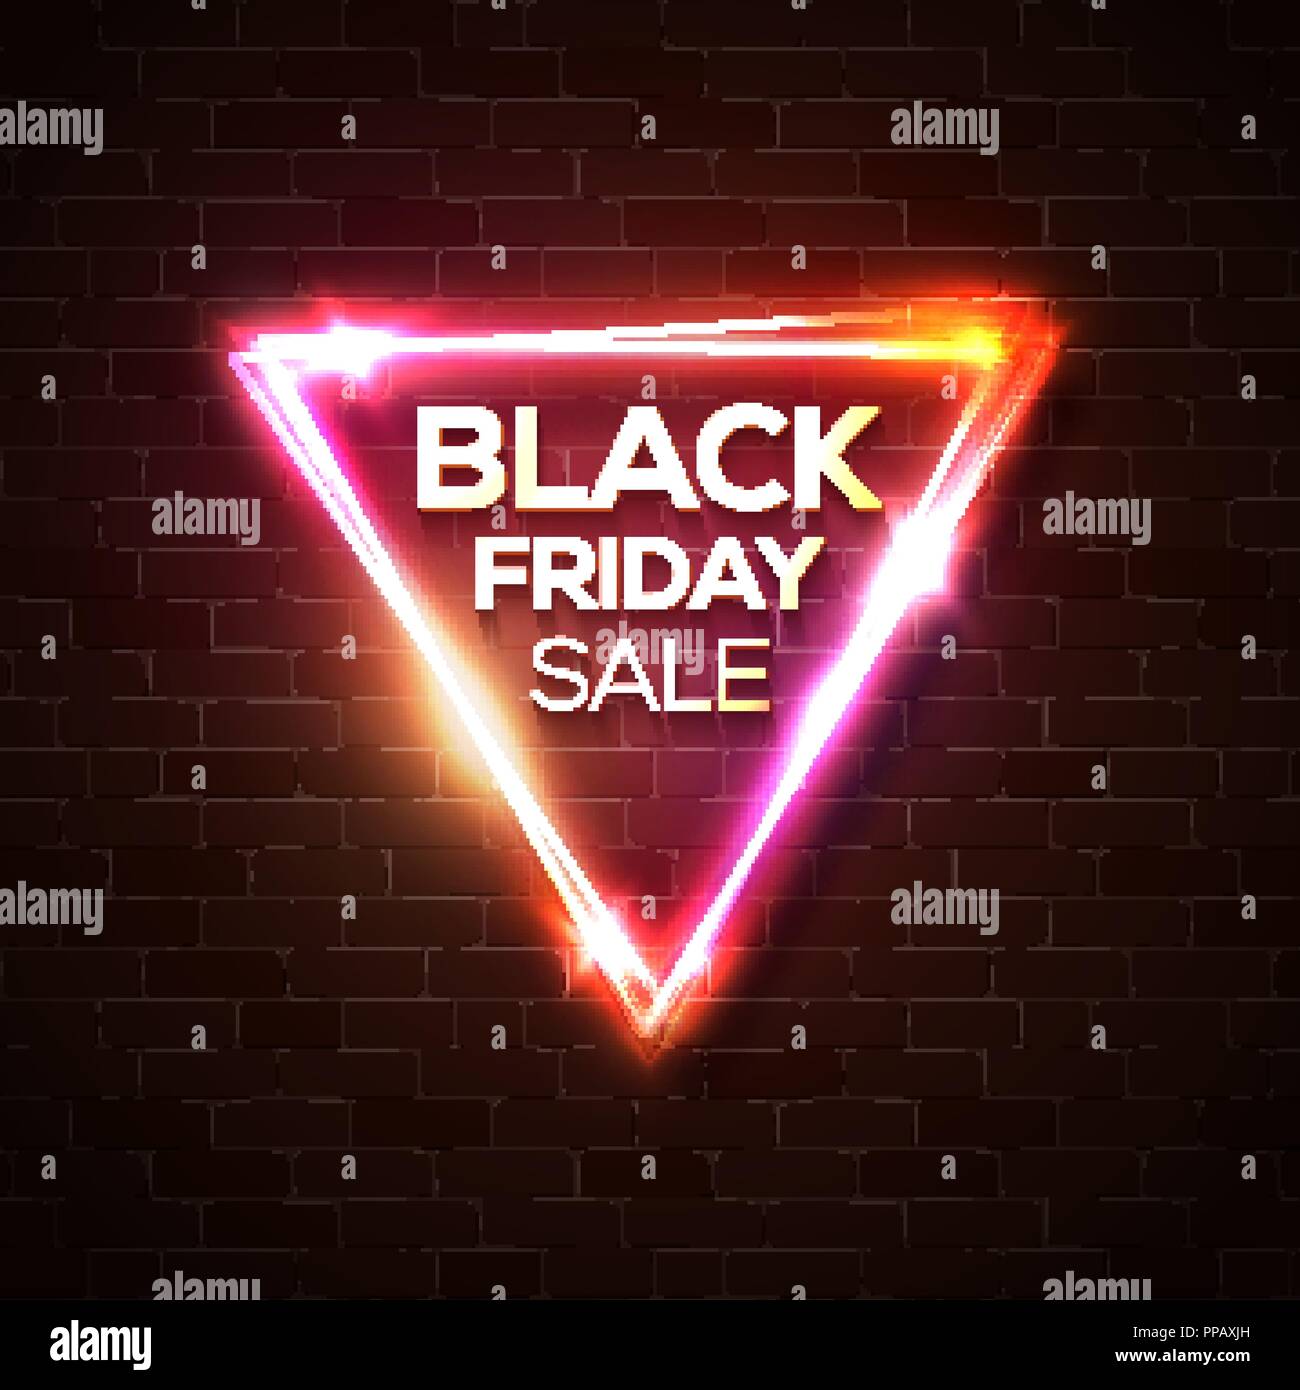 Black friday sale in neon triangle background. Geometric shape glowing tag. Modern shopping sign on brick background. Electric vector illustration. Stock Vector